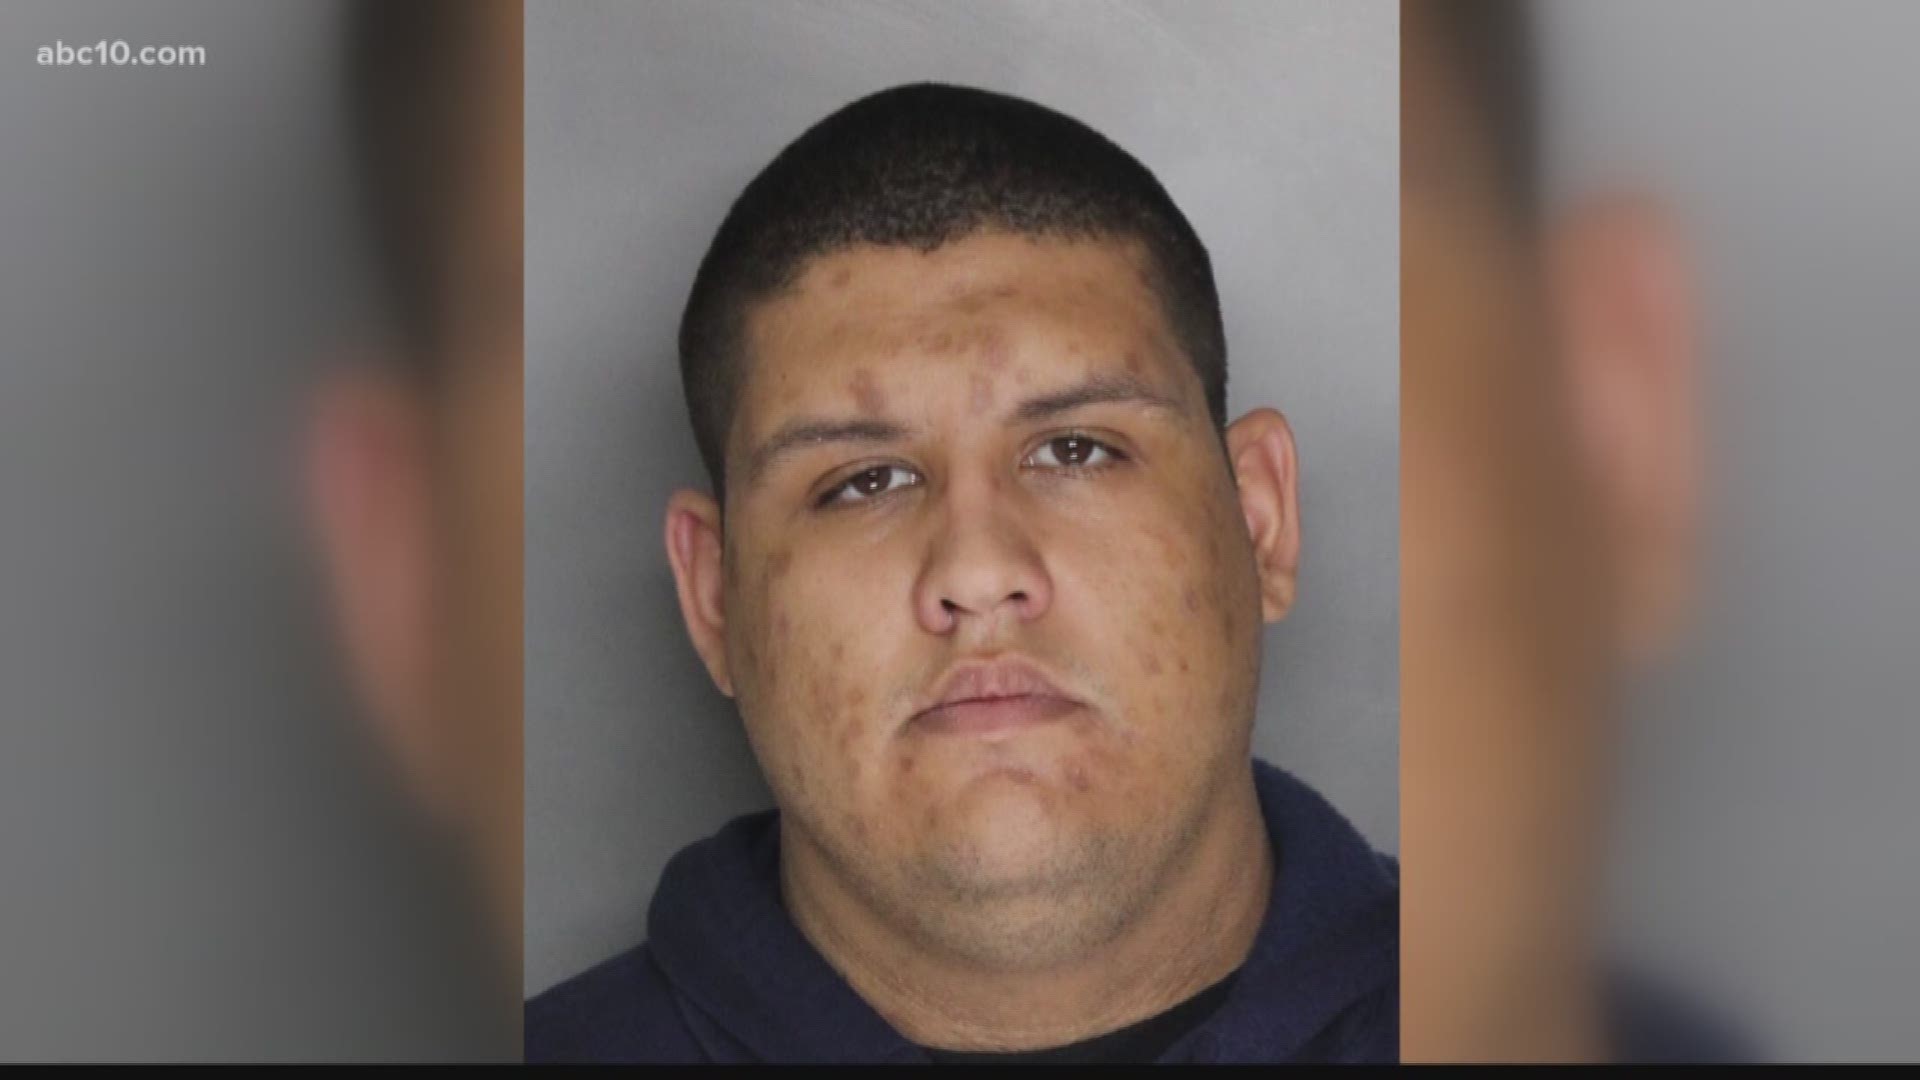 Sacramento County Sheriffs arrested a man Friday in connection to a 2015 homicide, a month after the remains of the victim were unearthed, department officials said.